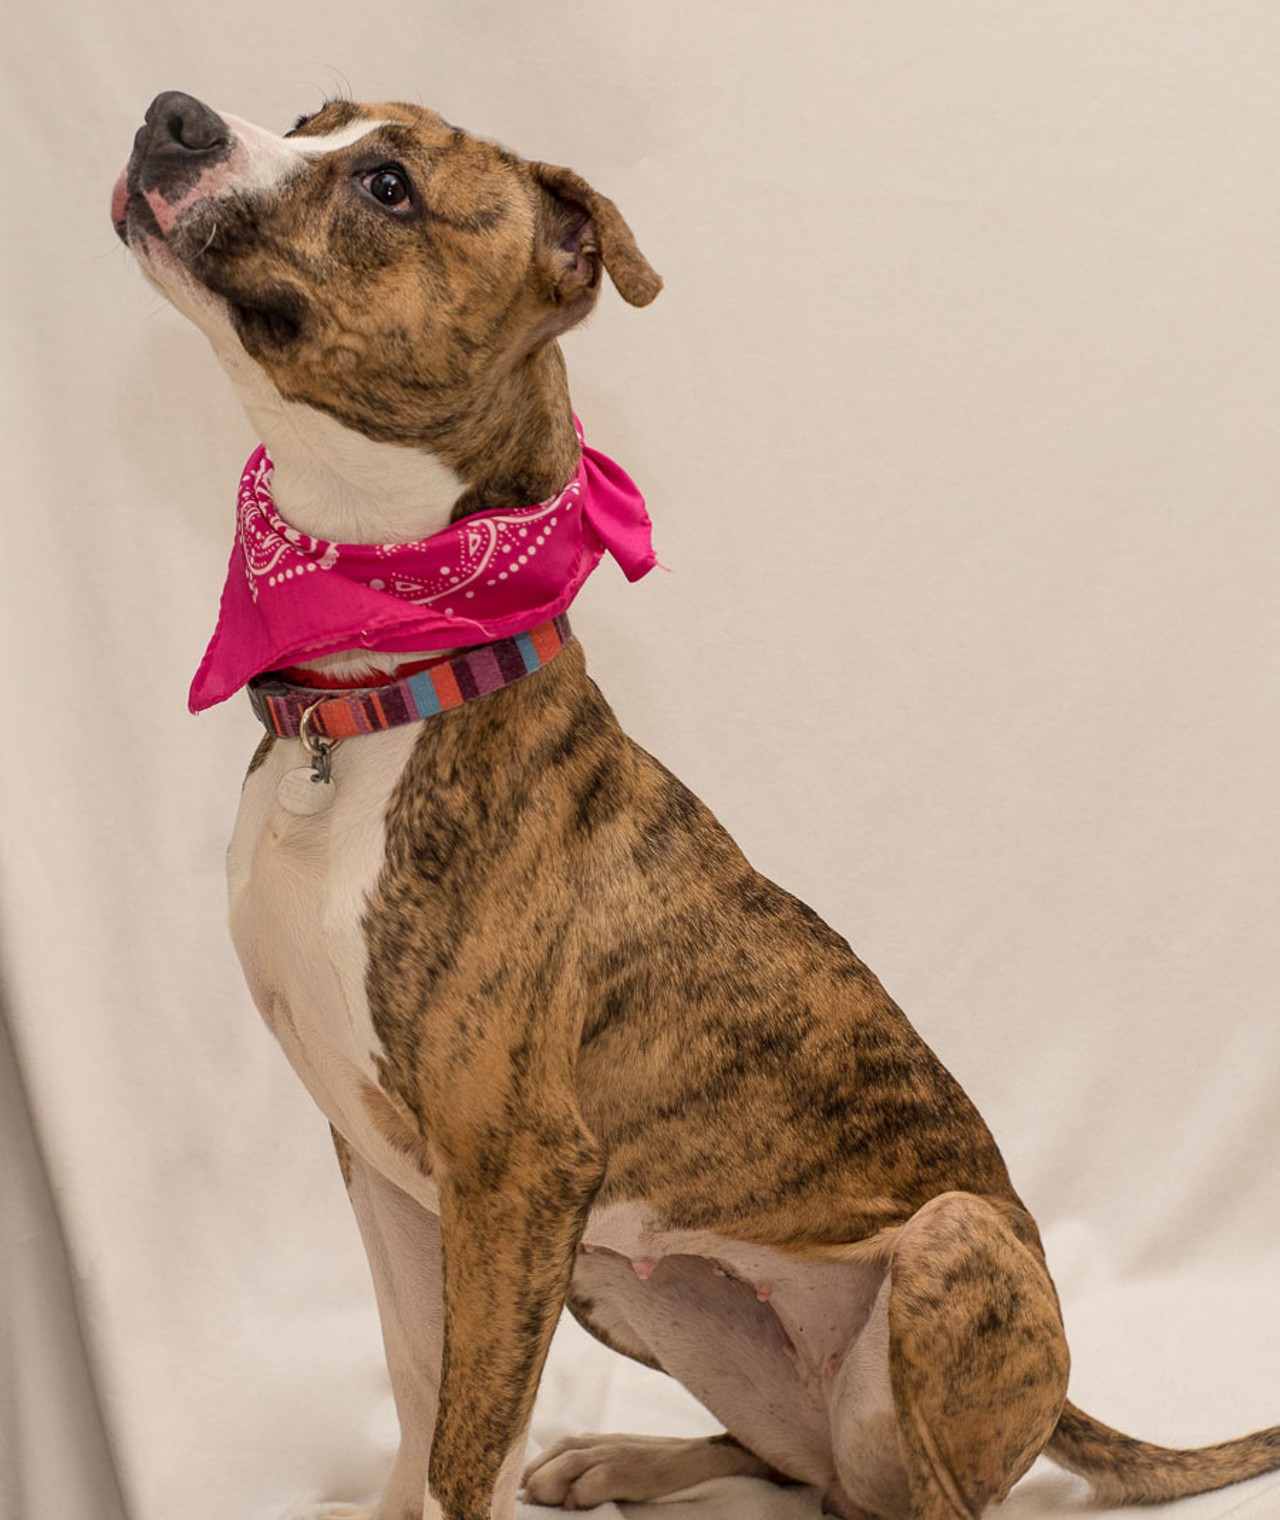 NAME: Bella
GENDER: Female
BREED: Pit Bull-Greyhound mix
AGE: 1 year
WEIGHT: 44 pounds
SPECIAL CONSIDERATIONS: Prefers a home with no cats and active dogs
REASON I CAME TO MHS: Agency transfer
LOCATION: Mackey Center for Animal Care in Detroit
ID NUMBER: 862503